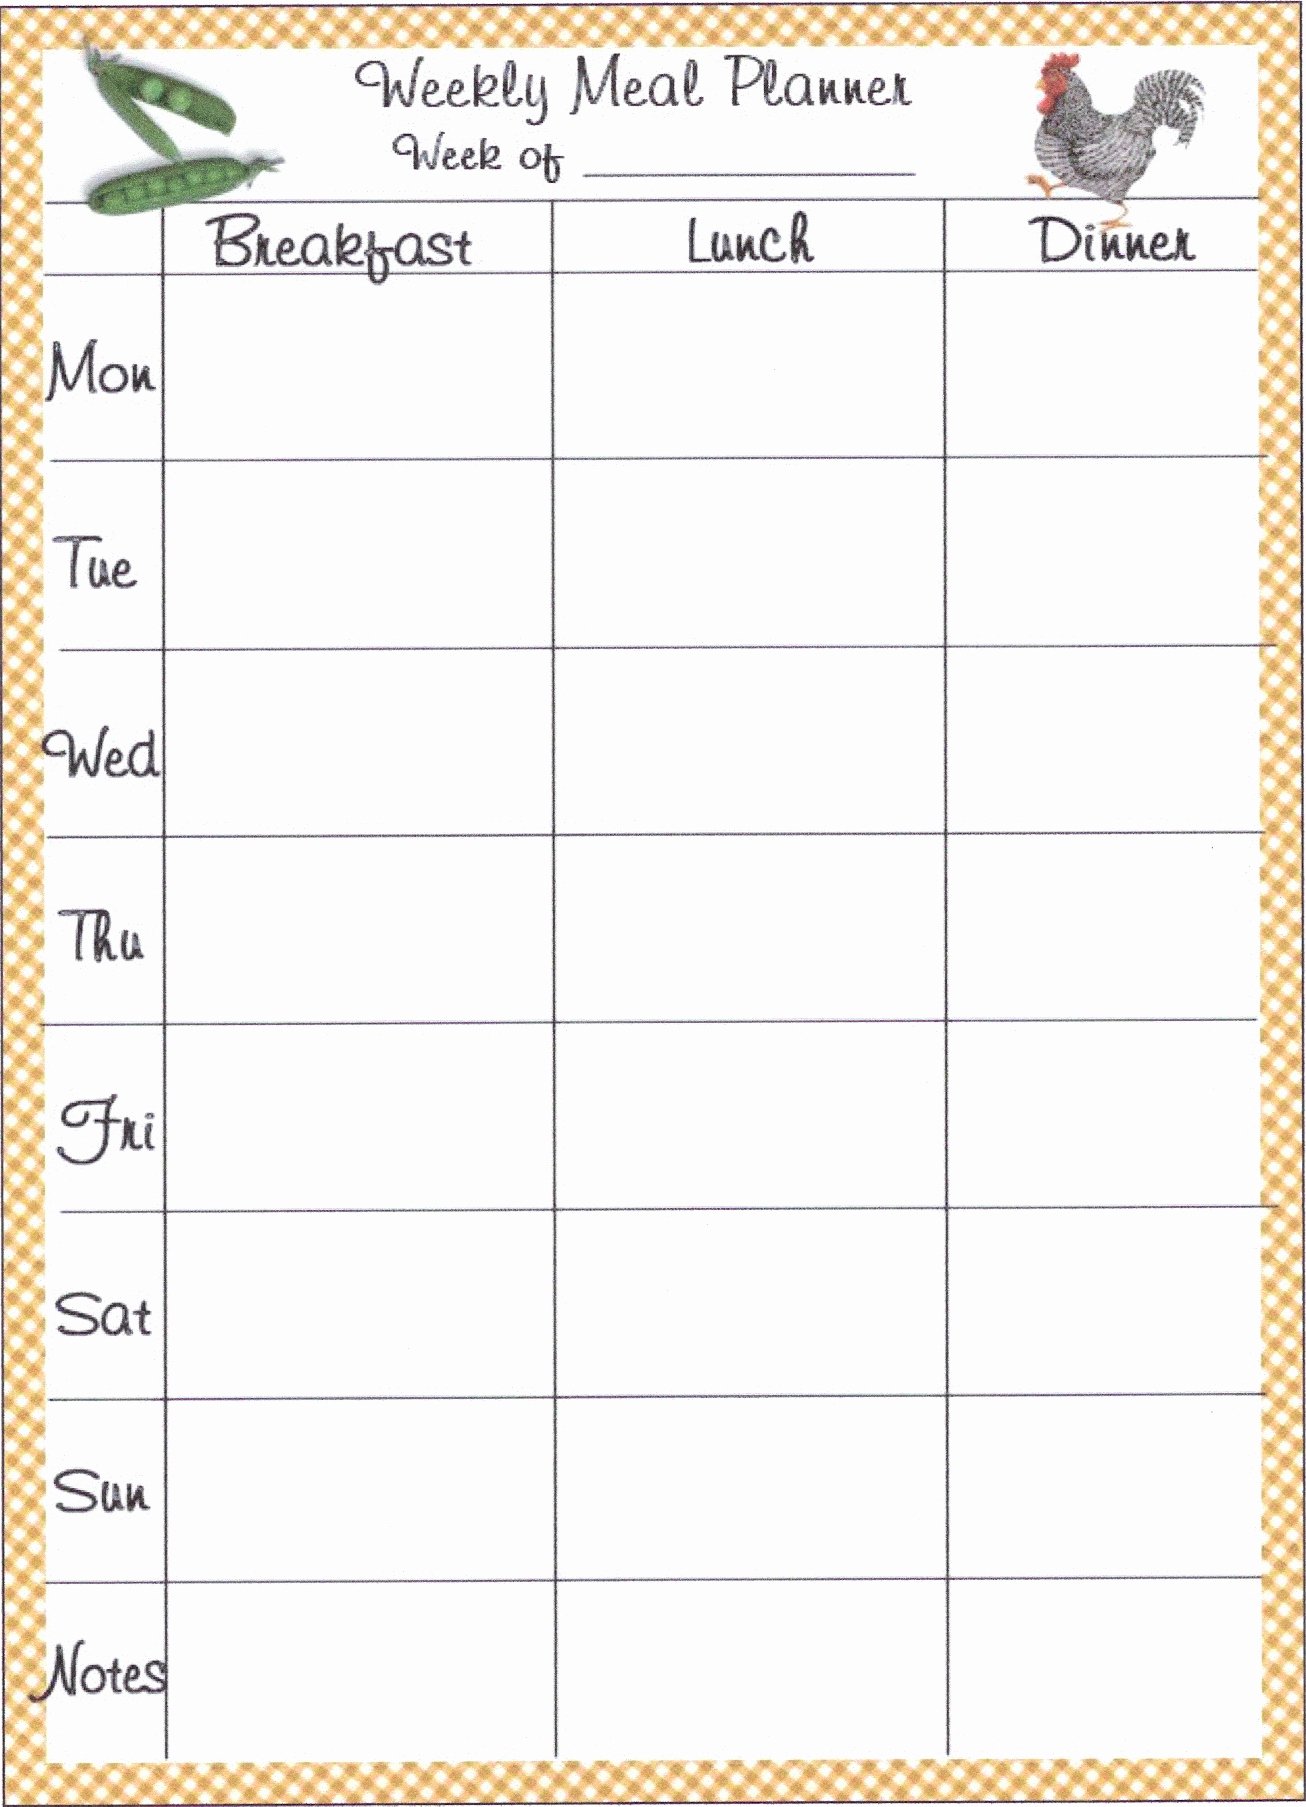 Monthly Meal Planner Template Awesome 45 Printable Weekly Meal Planner Templates